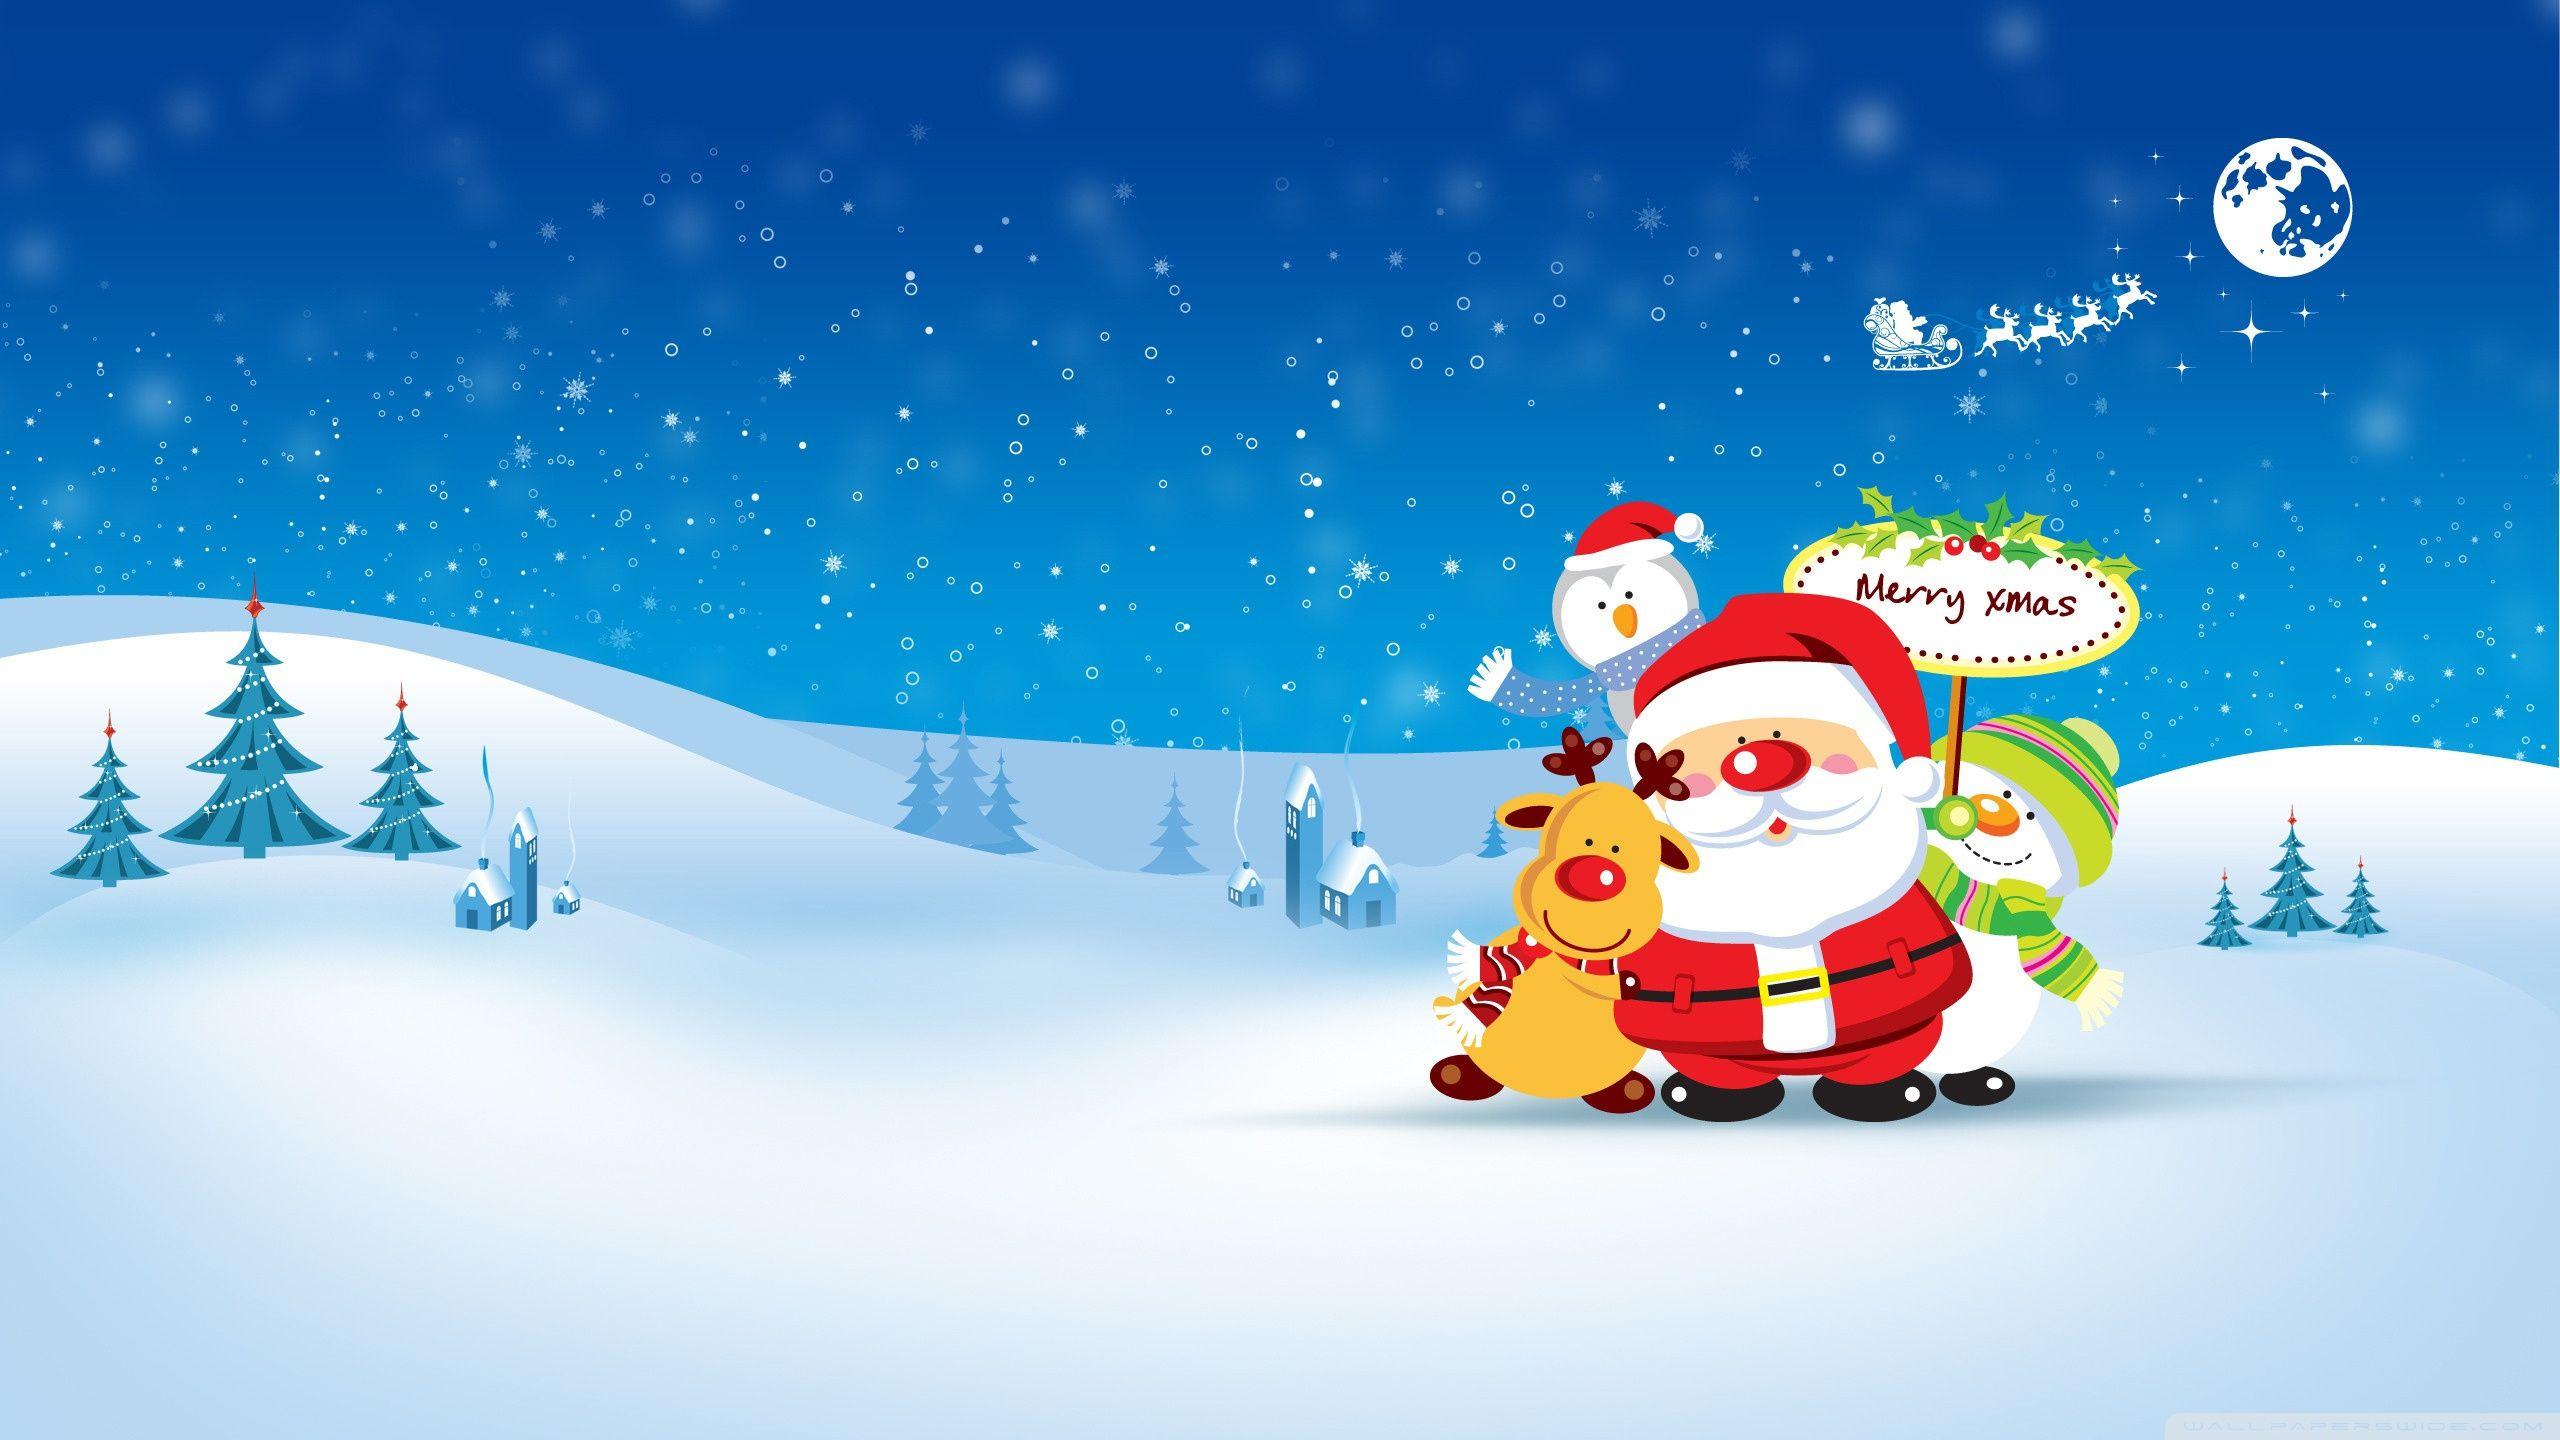 Merry Xmas Ultra HD Desktop Background Wallpaper for: Multi Display, Dual Monitor, Tablet